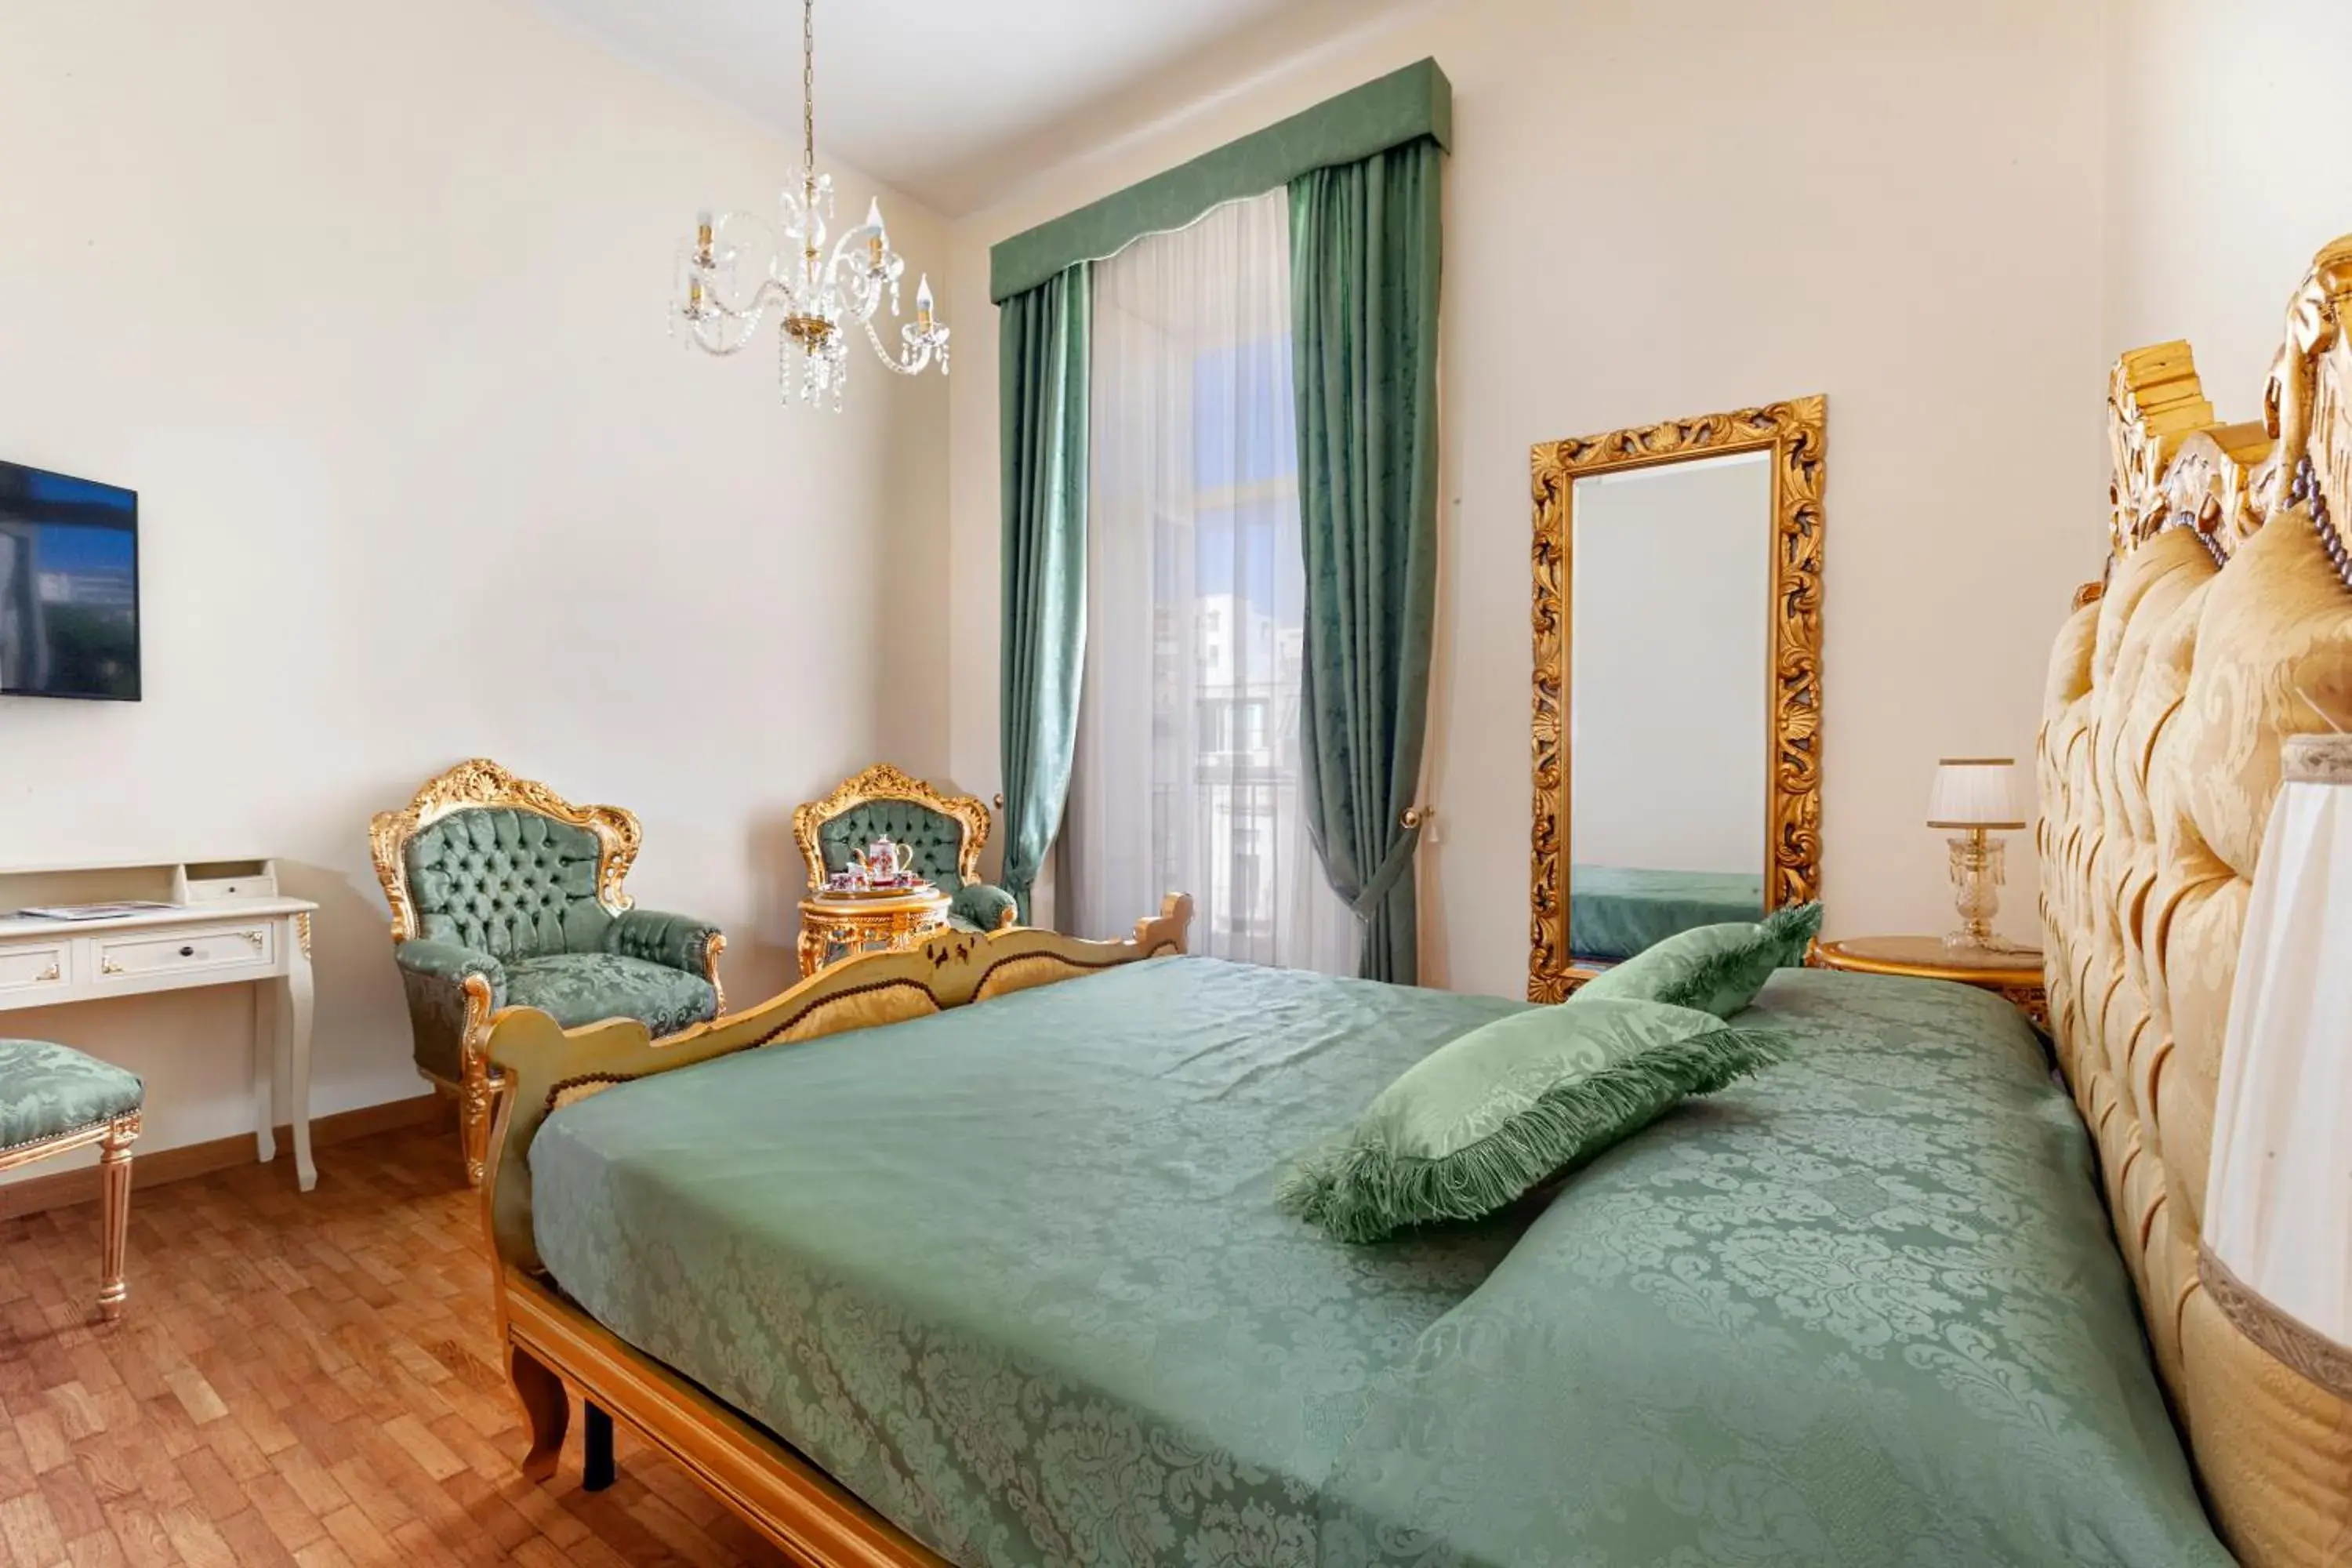 Bed, Room Photo in Relais Antica Napoli